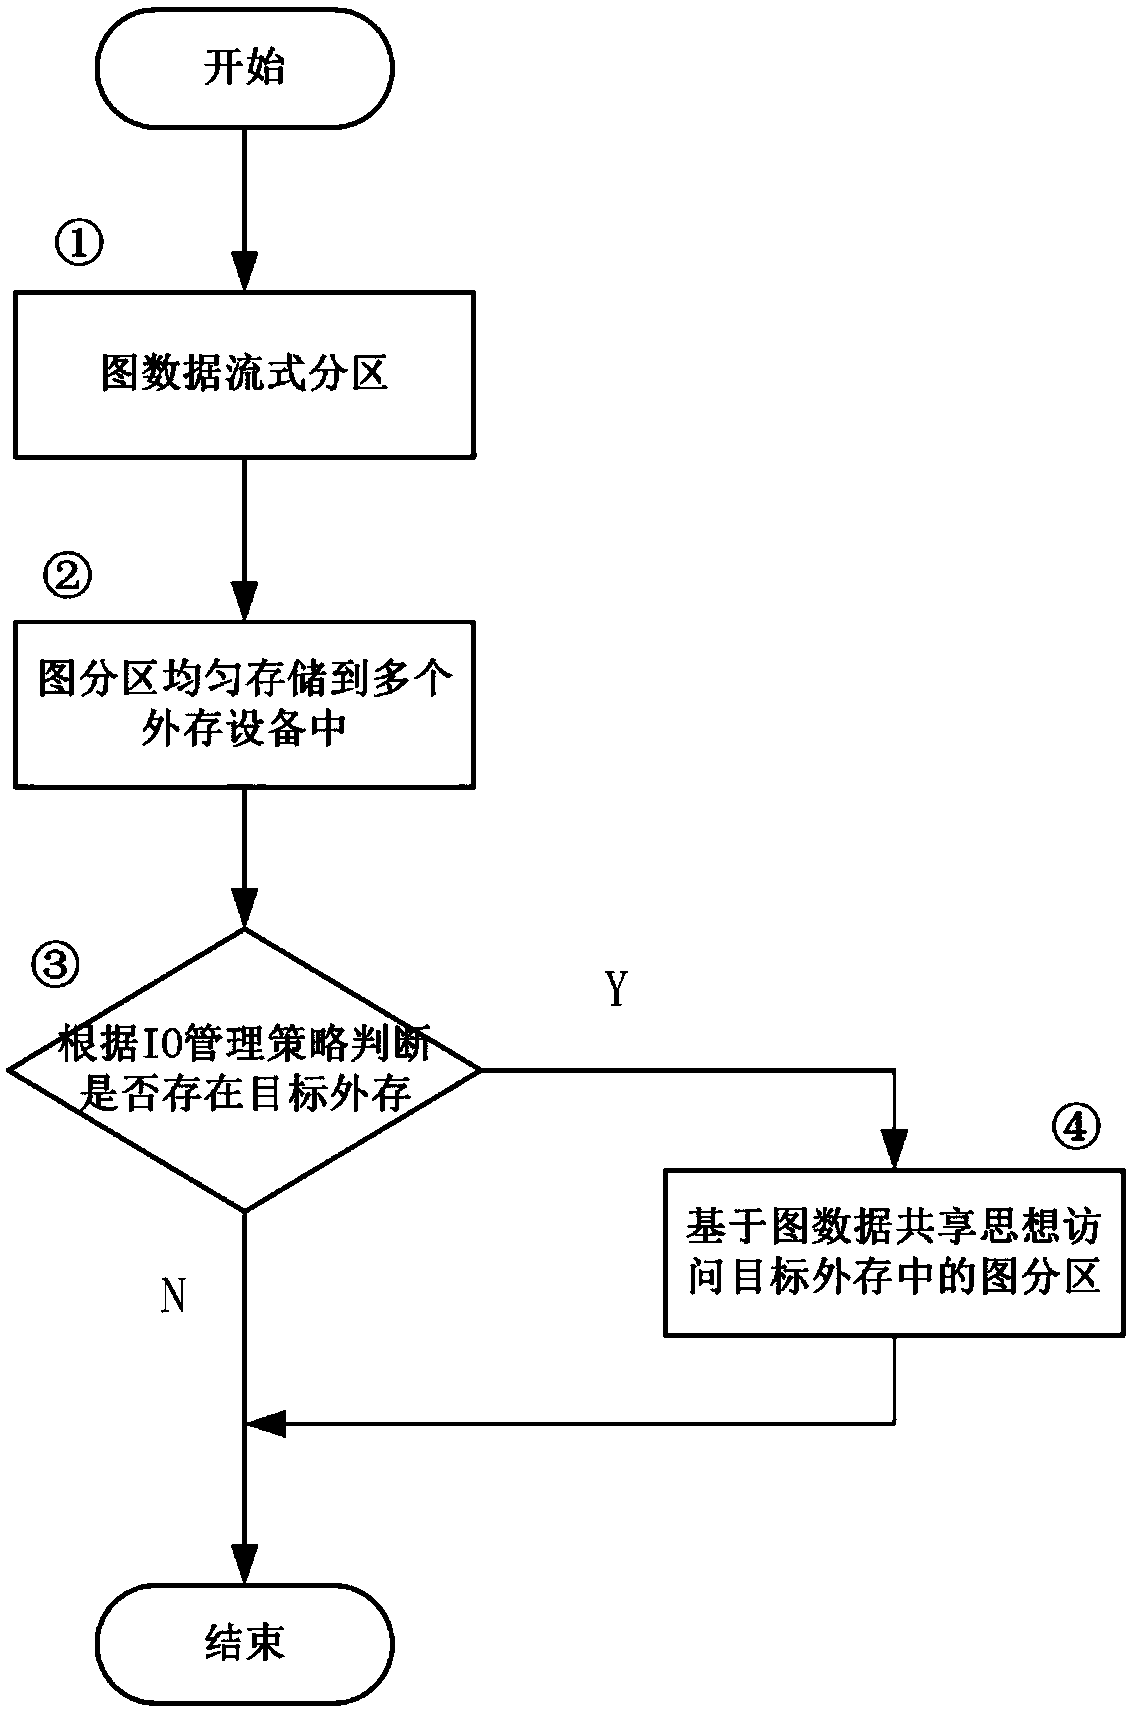 A multi-task external memory schema graph processing method based on I/O scheduling